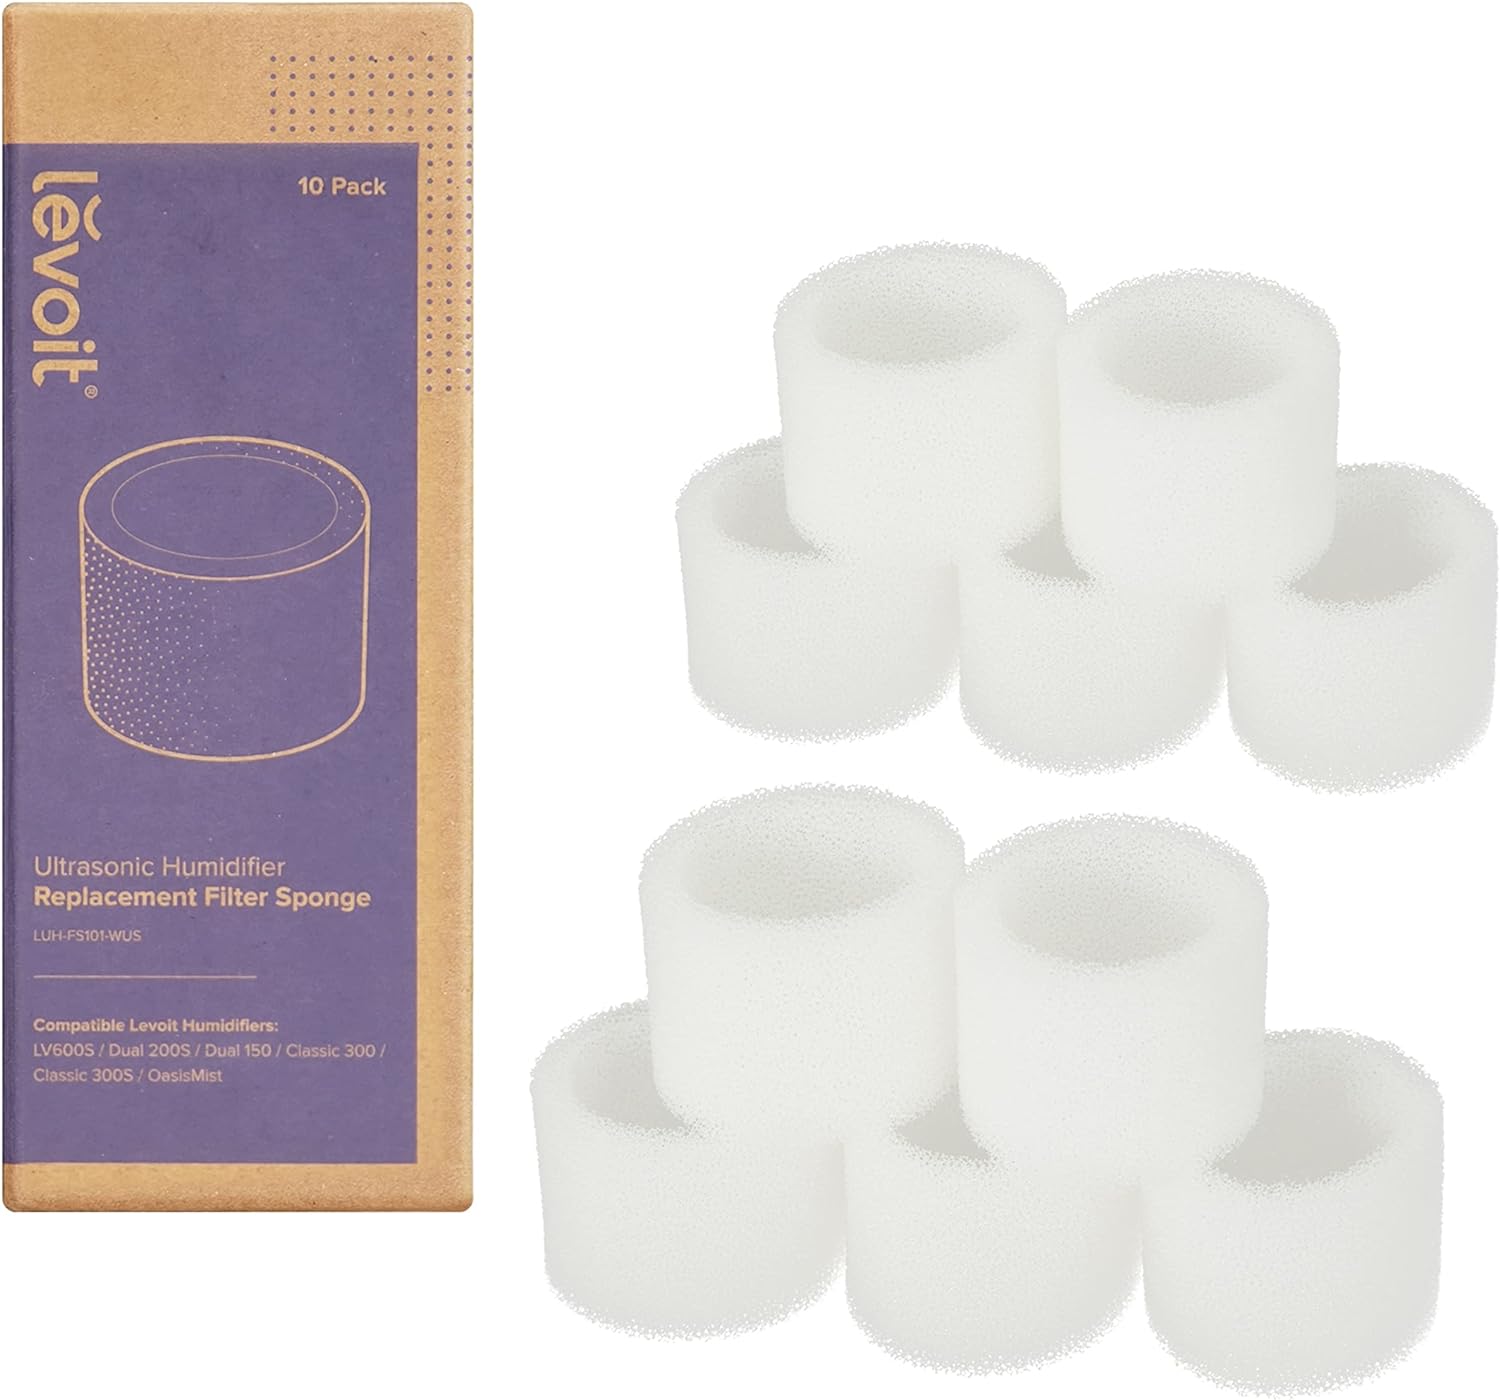 LEVOIT 10-Pack Top Fill Humidifier Replacement Filters, Capture Particles to Improve Humidification Efficiency, for Classic160, Dual150, Dual200S, Classic300(S), LV600S, OasisMist450S, Superior6000S